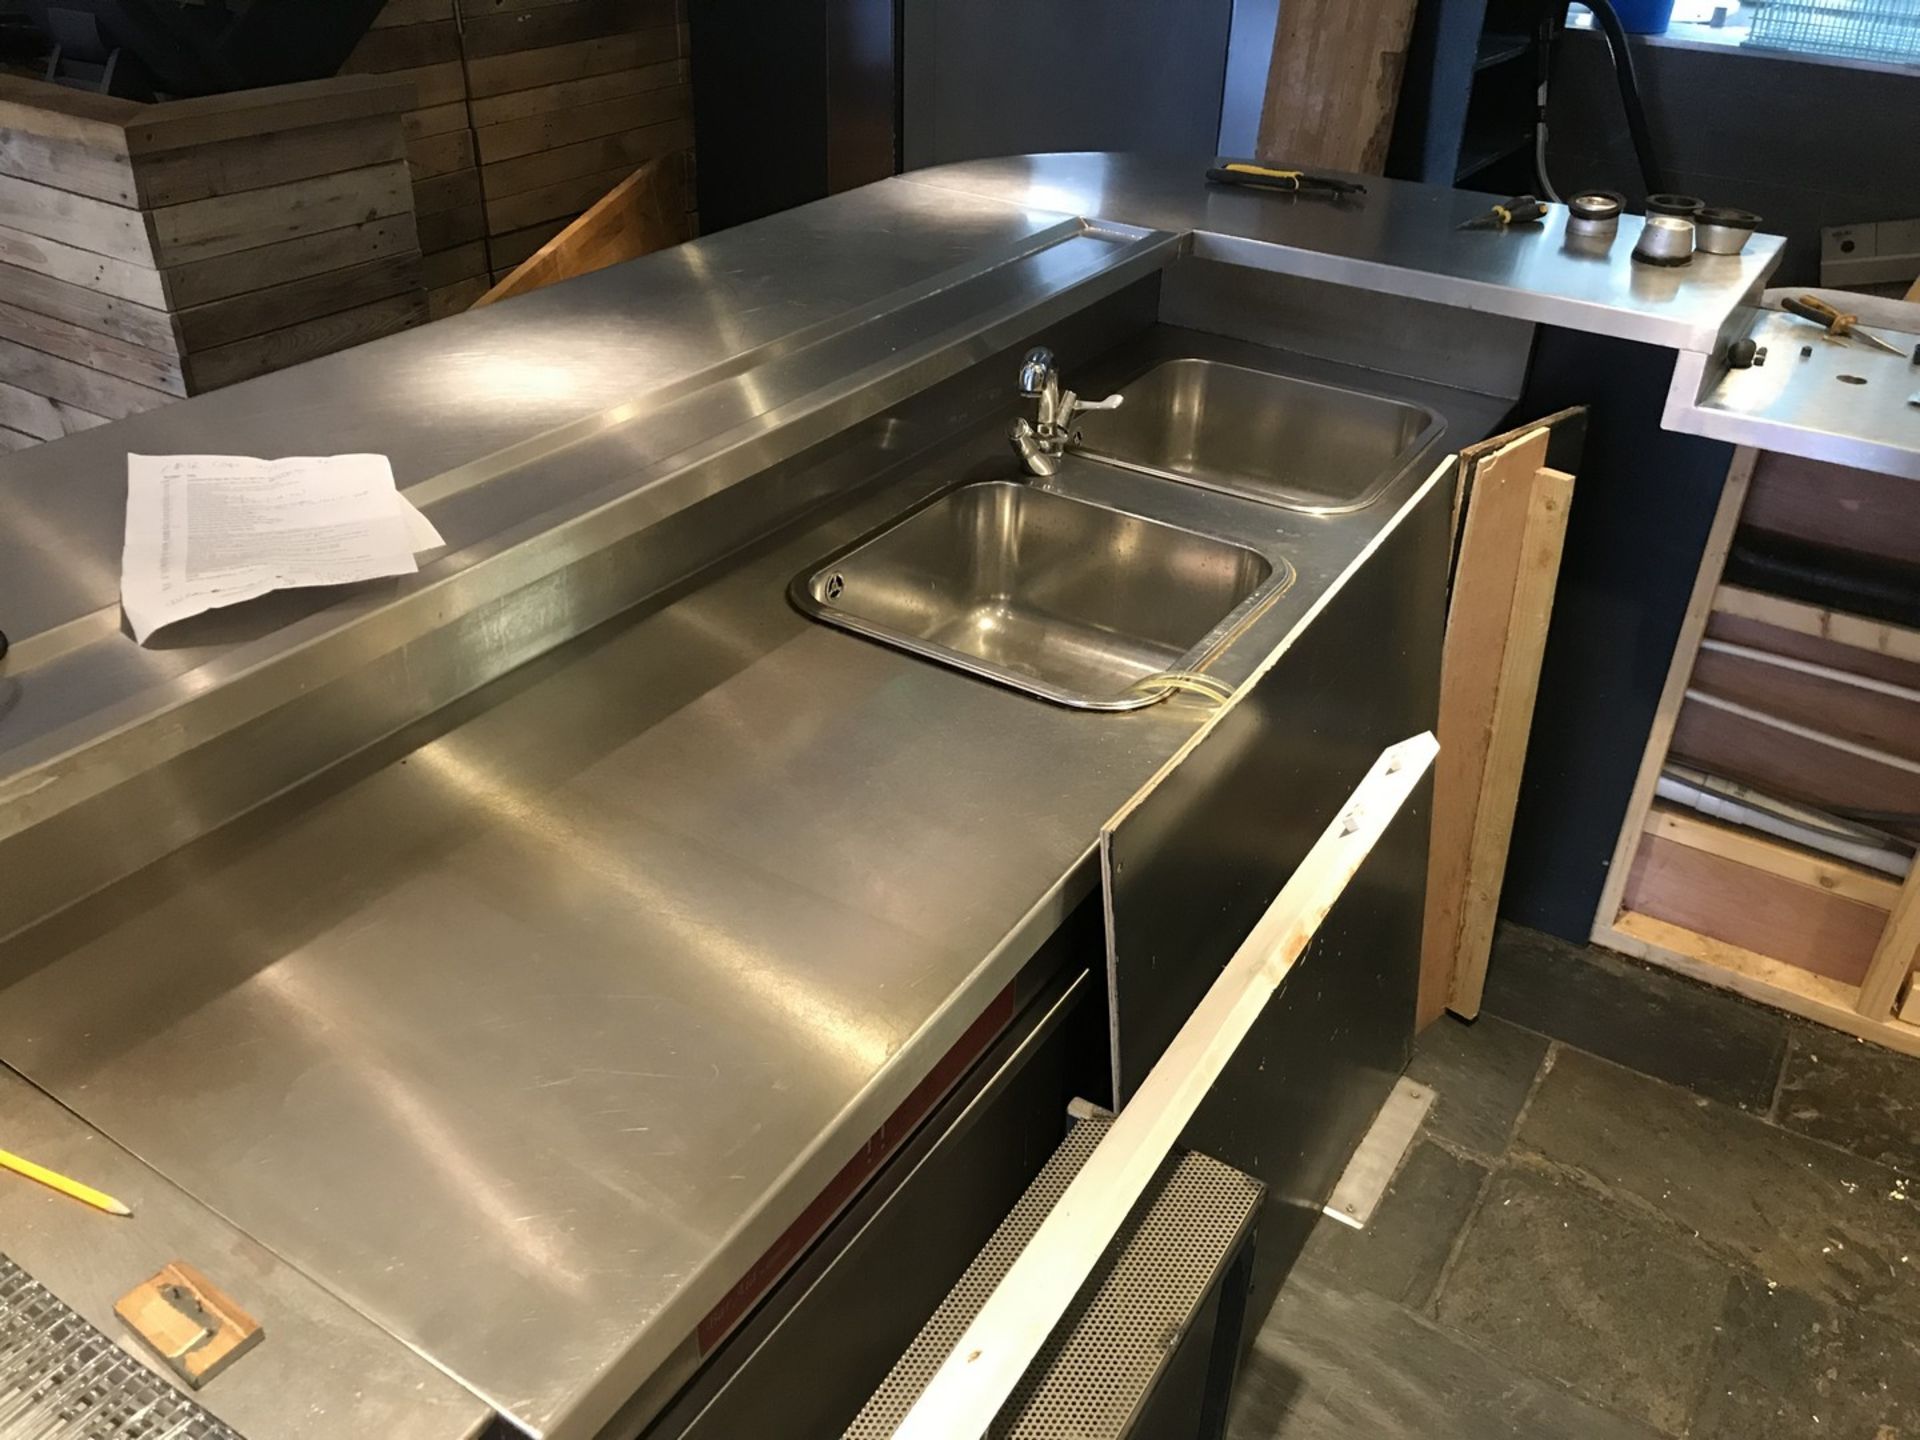 Double stainless steel Sink.